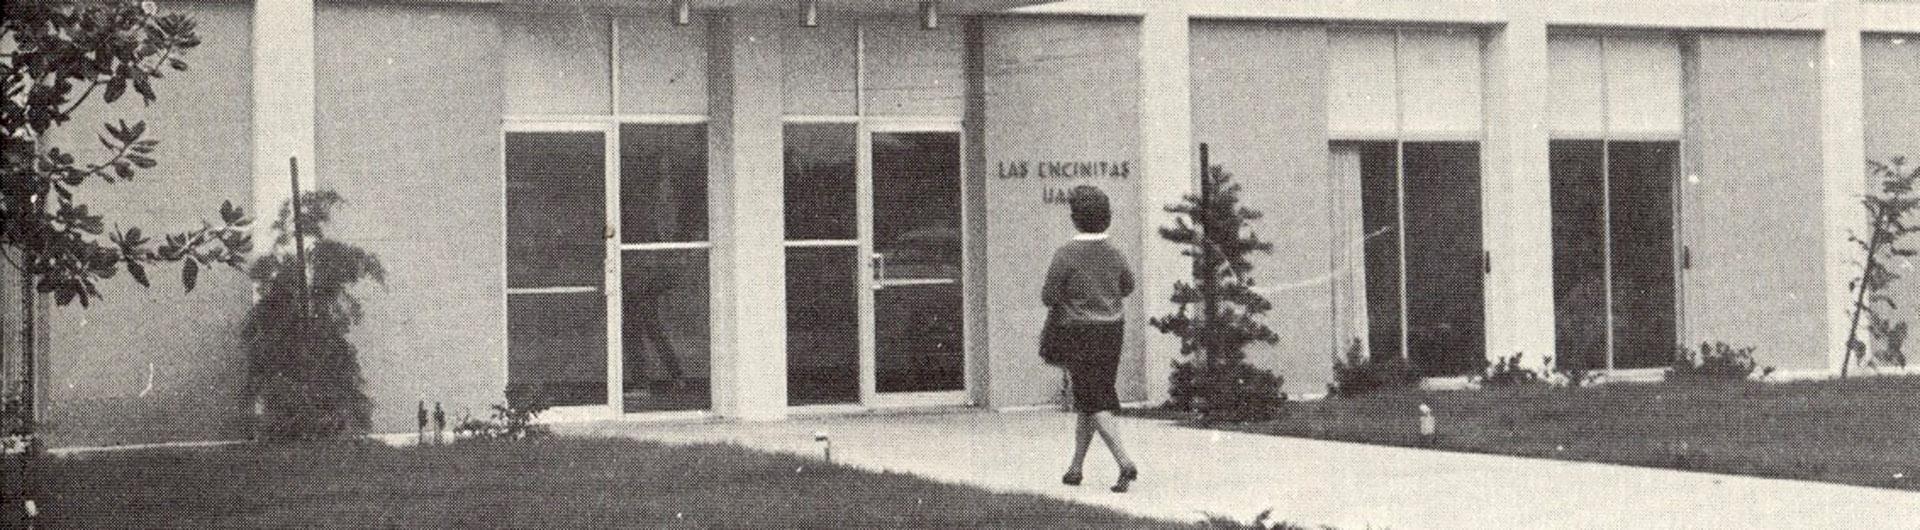 1960's campus image, student walking to campus